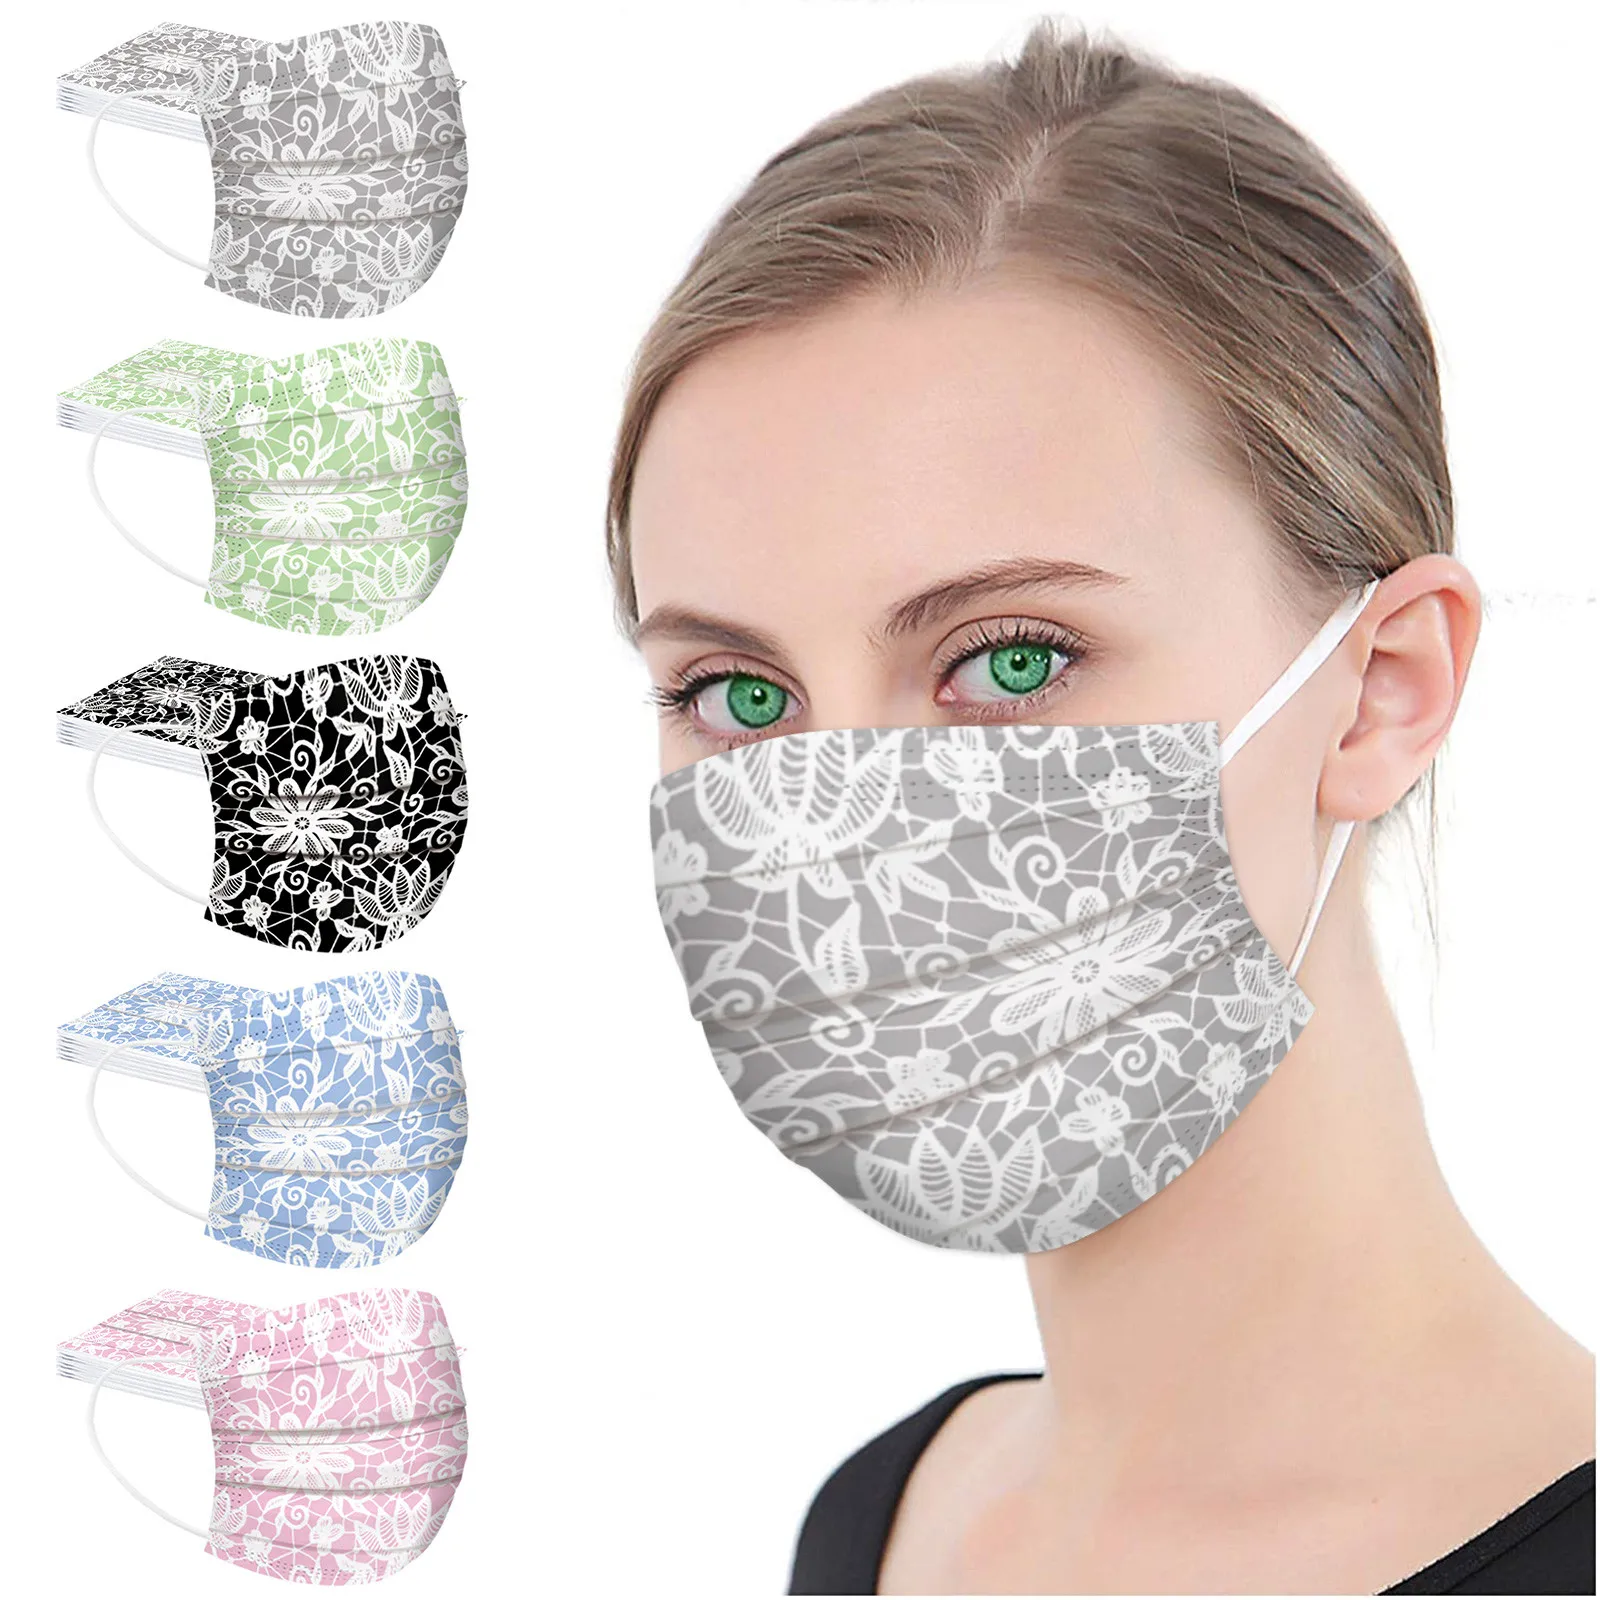 

10pc Disposable Adult's Flower Printed Mask Protective Unisex Face Masks 3 Ply Earloop Breathable Cosplay Masks Mаска Mascarilla